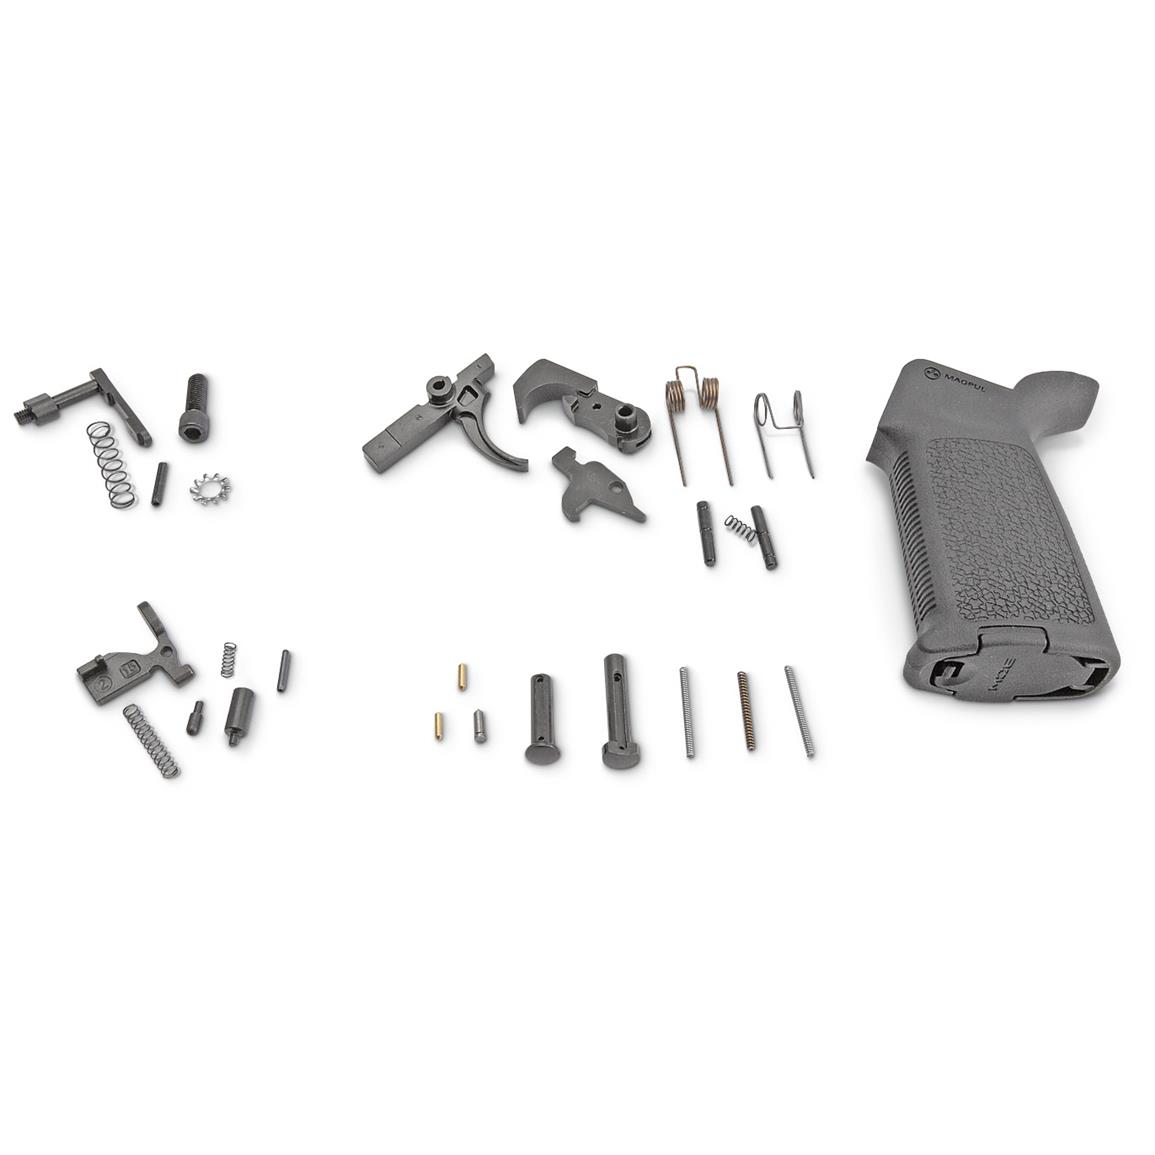 Anderson Lower Parts Kit with Magpul Grip